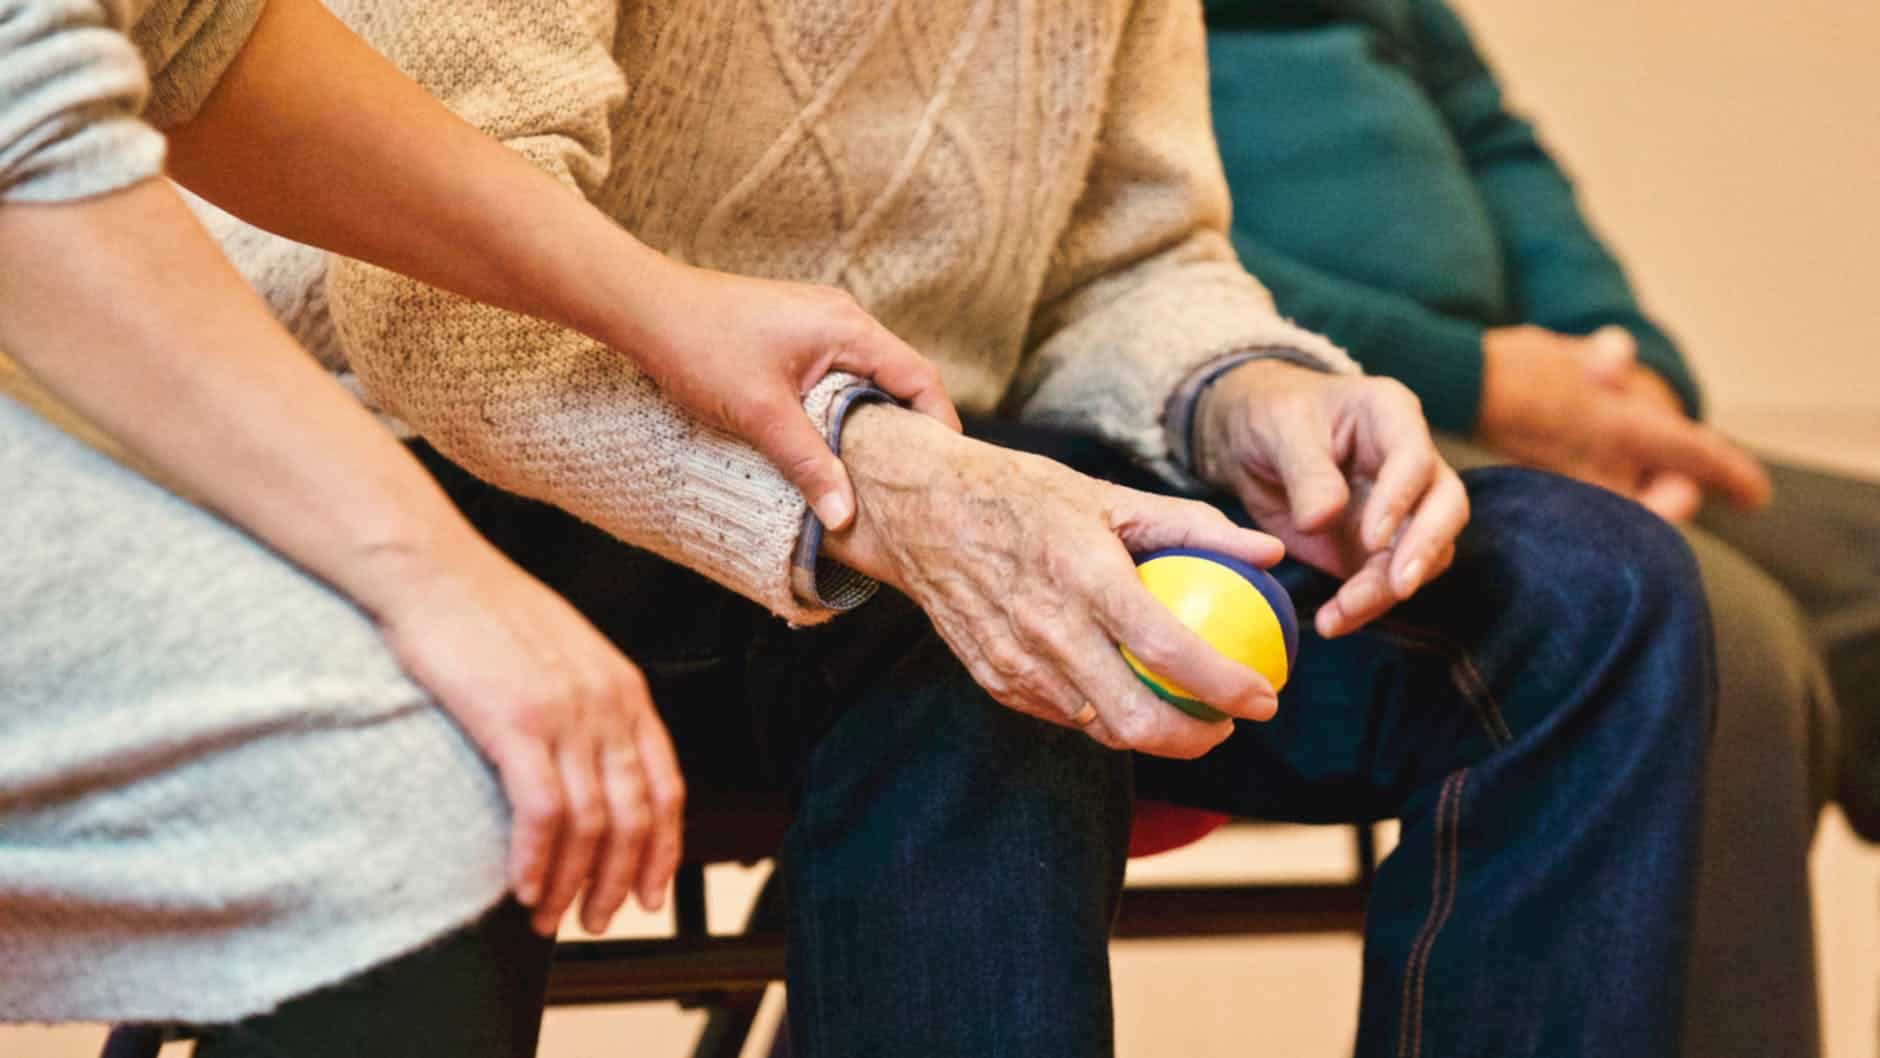 physical therapy with ball, elderly care, assistance, help, elderly assistance